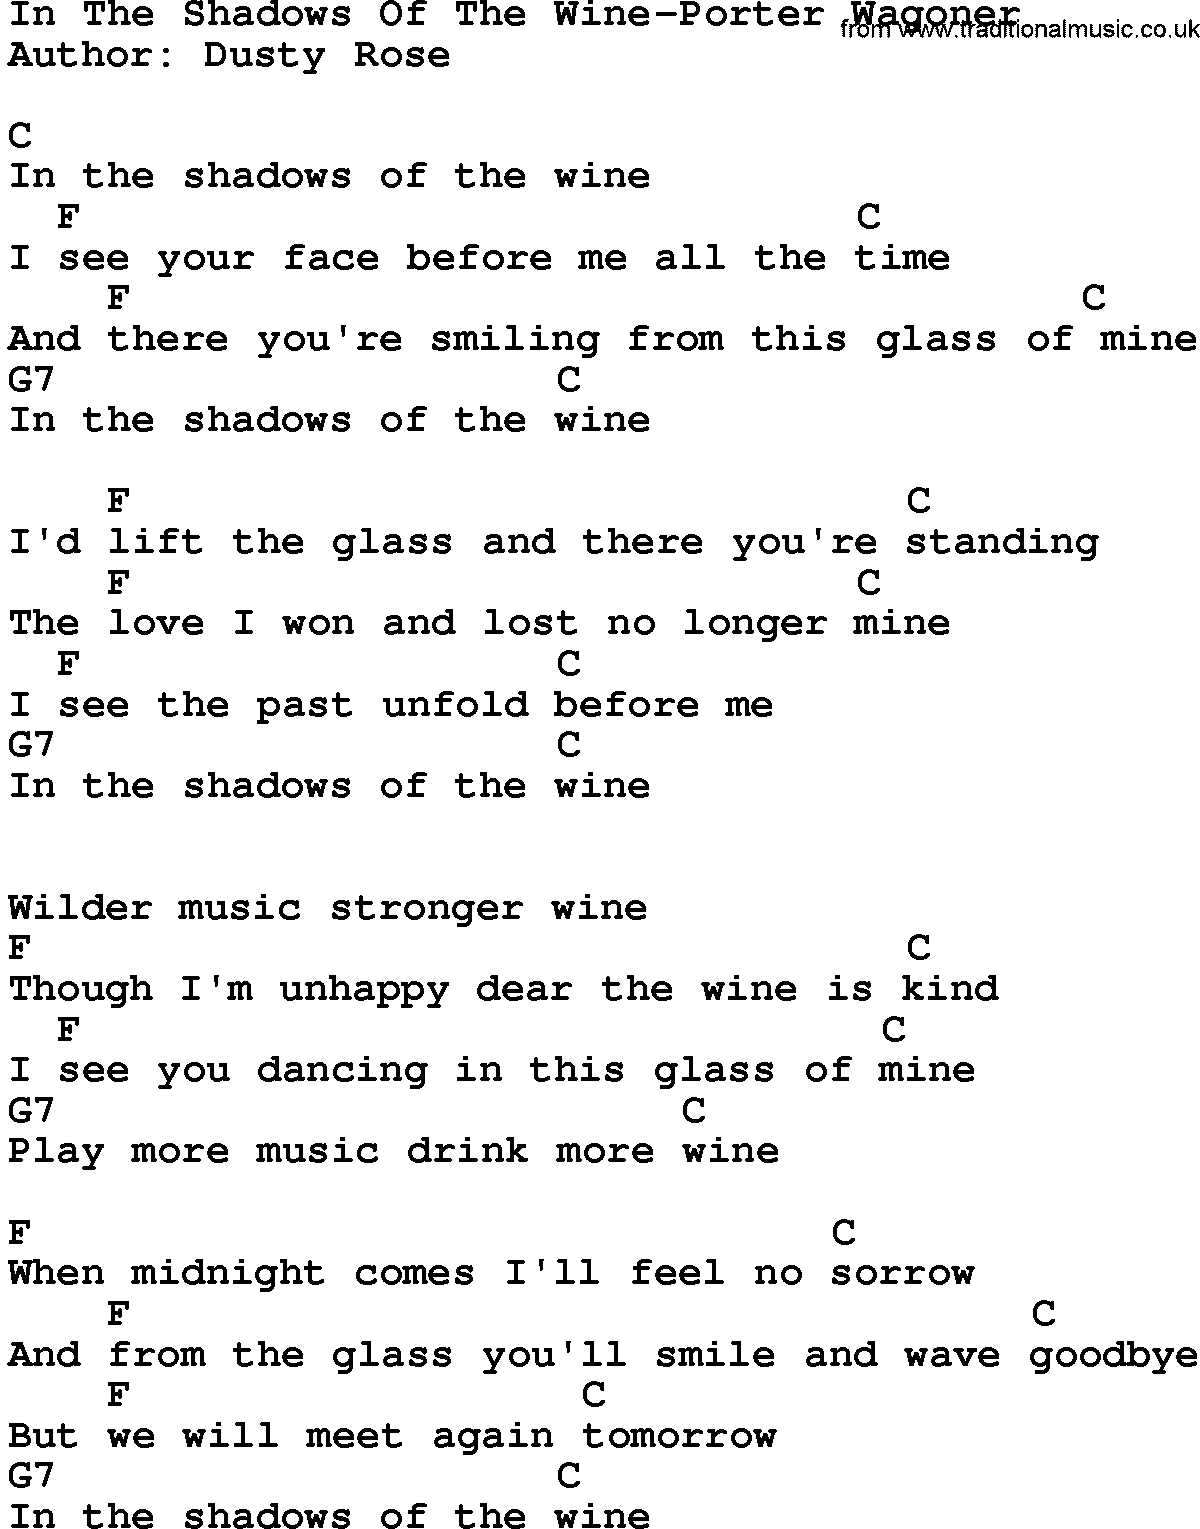 Country music song: In The Shadows Of The Wine-Porter Wagoner lyrics and chords